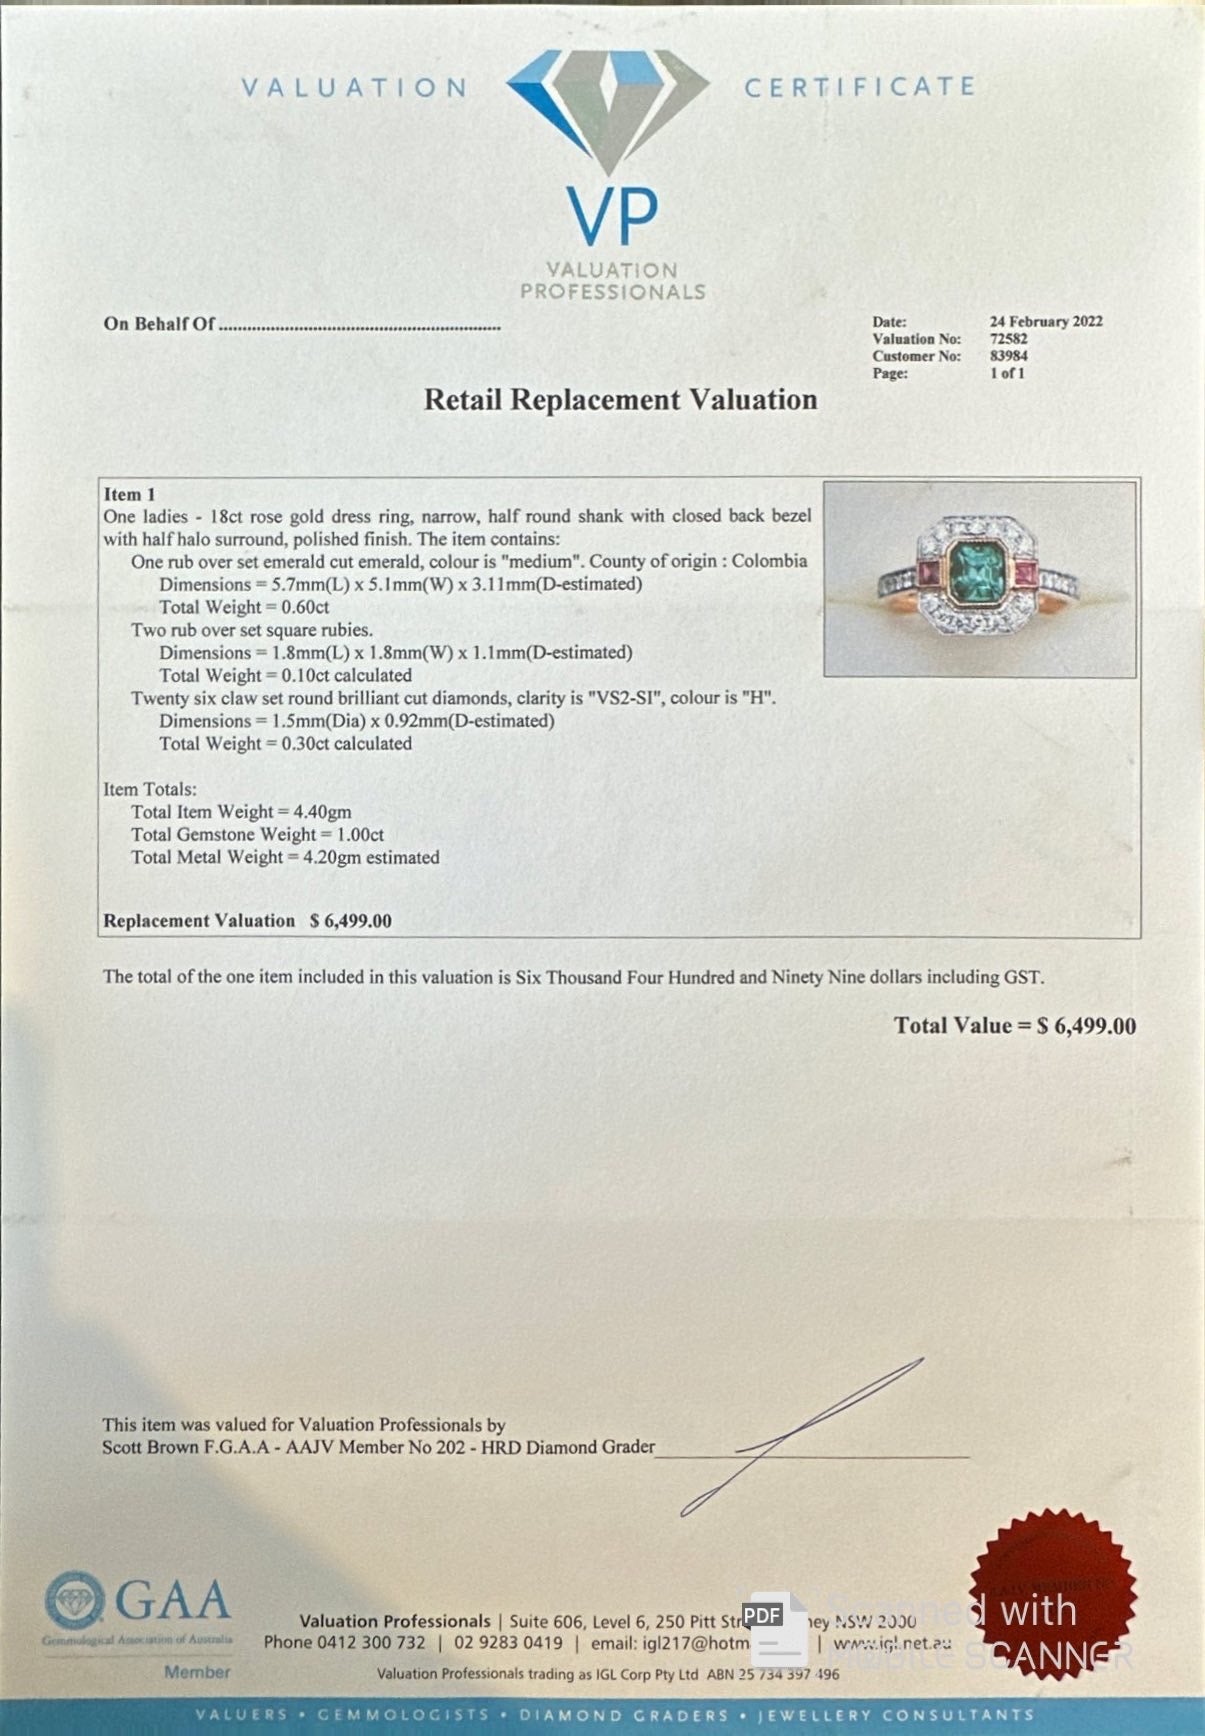 14ct Rose gold Colombian Emerald and Ruby Ring